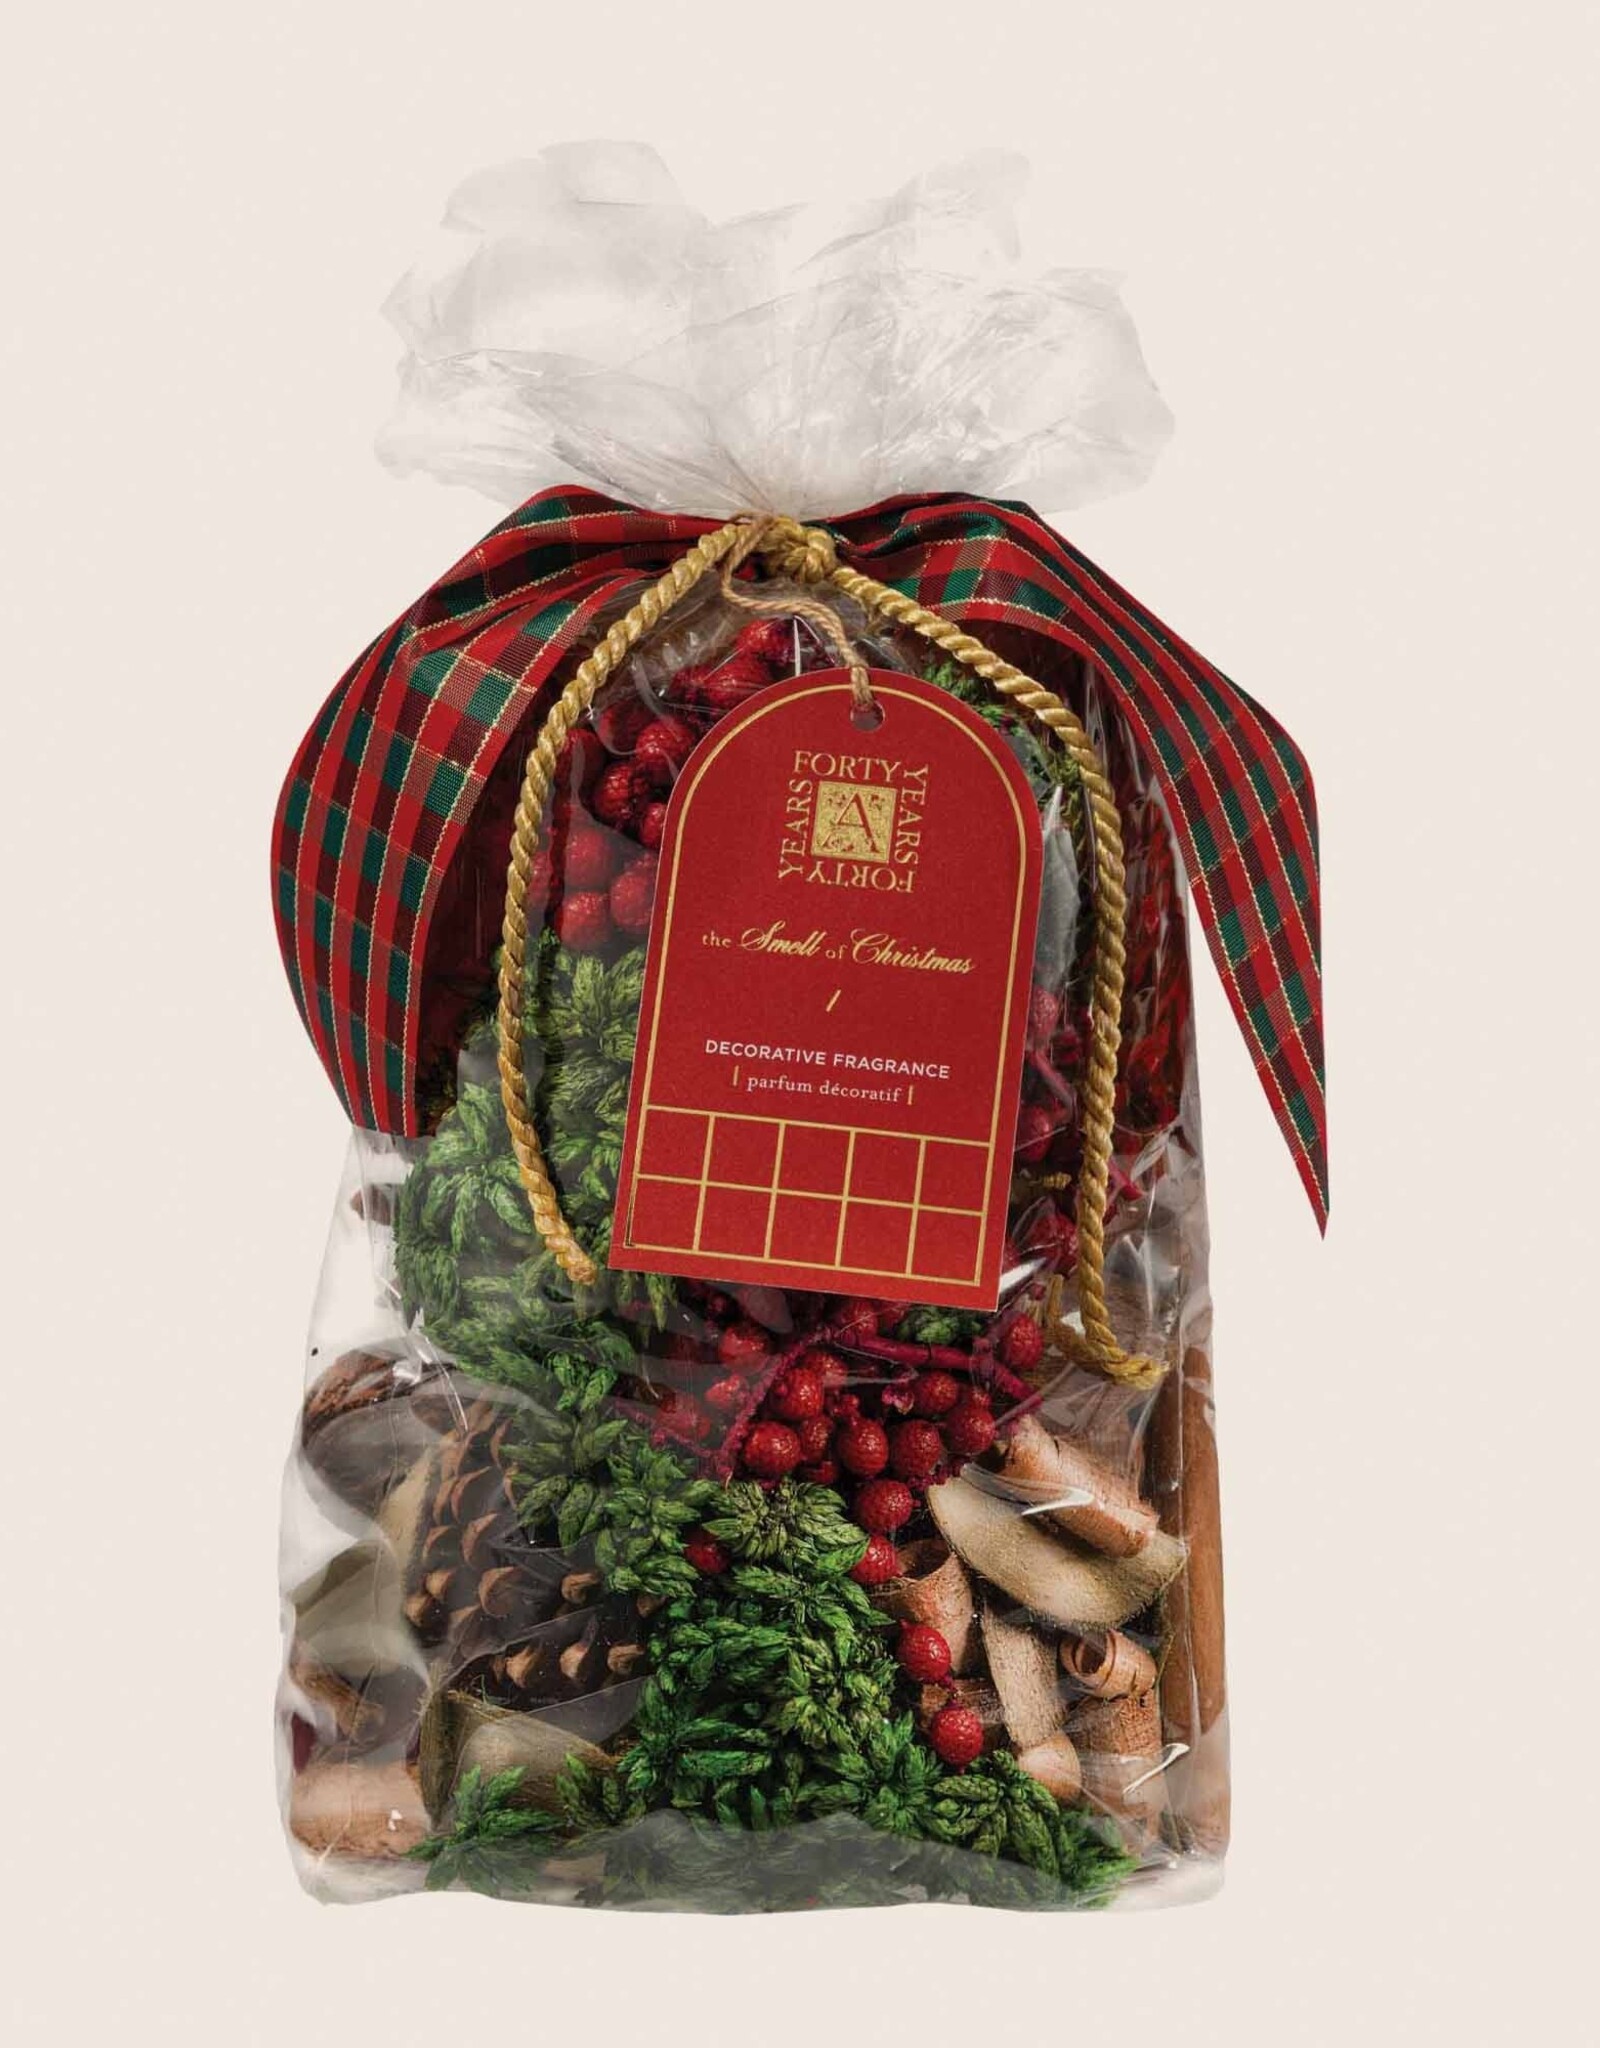 The Smell of Christmas - Large Decorative Fragrance